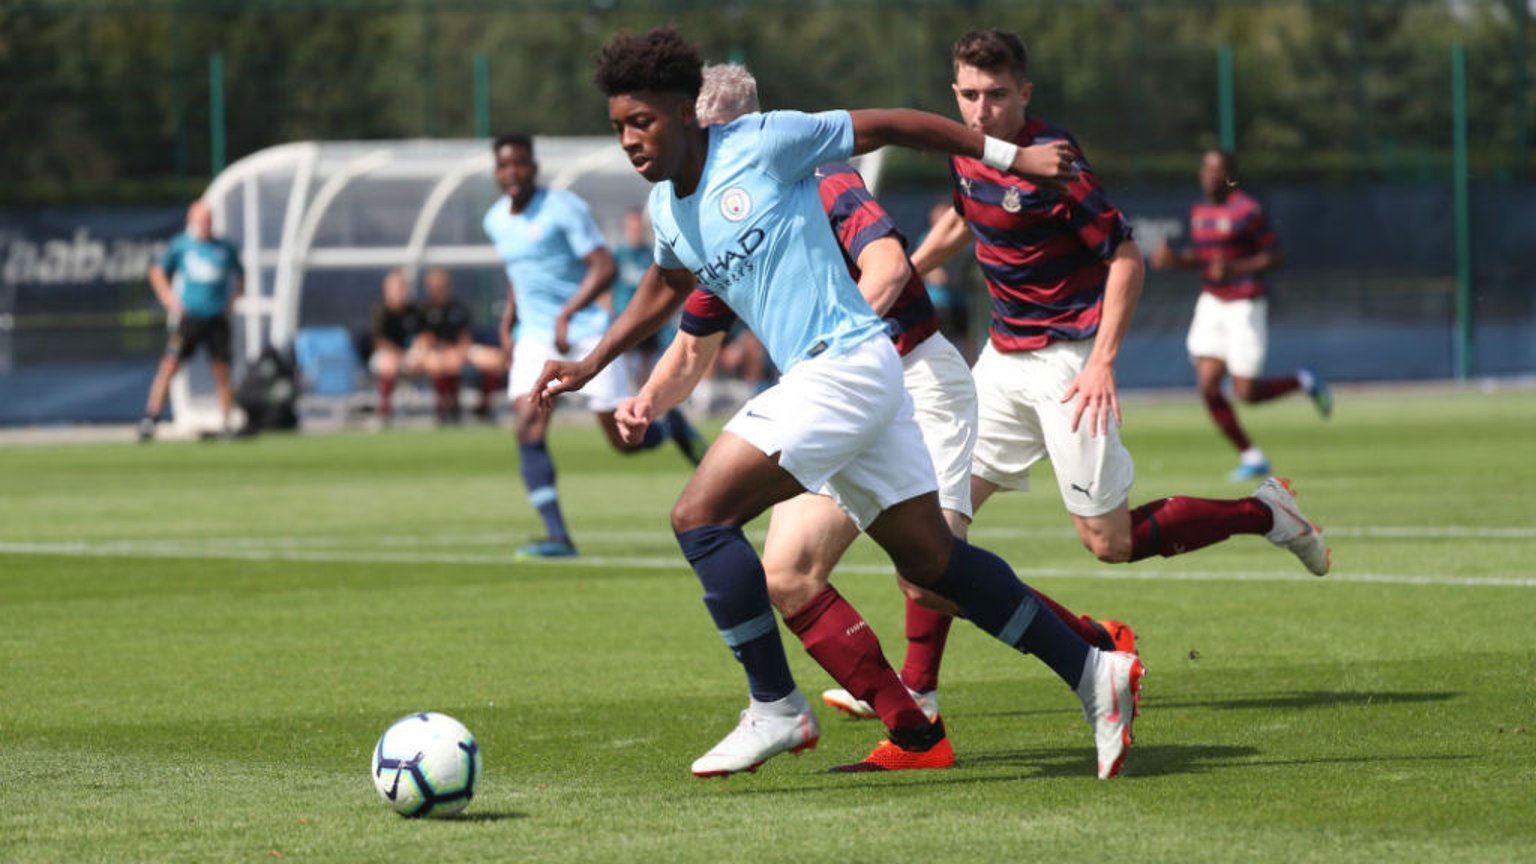 ON THE MARK: Keke Simmonds opened the scoring for City's Under-18s away at West Brom